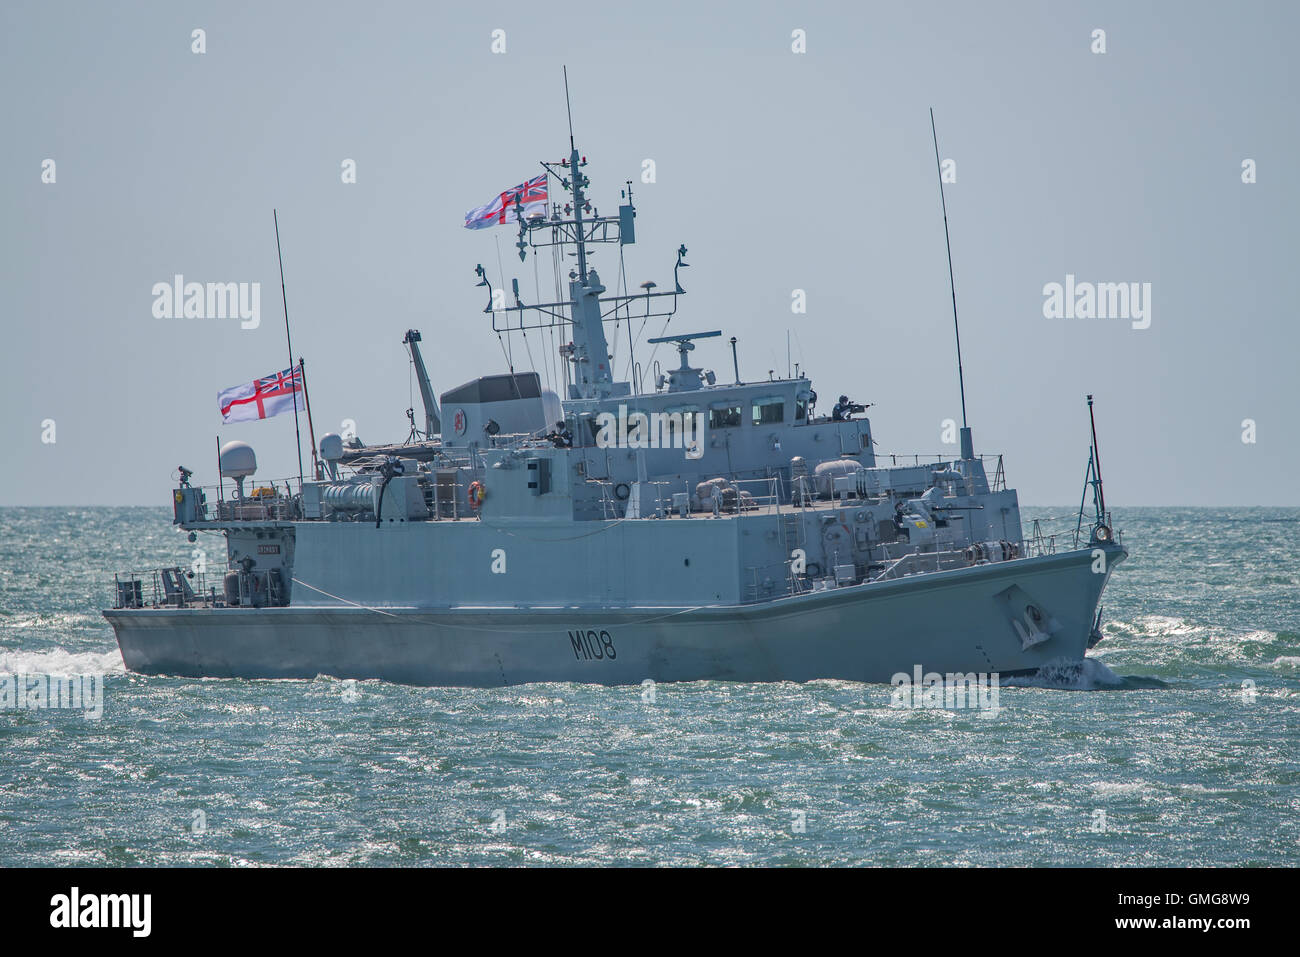 The British Royal Navy Mine Warfare Vessel, HMS Grimsby in demonstration action at Bournemouth Air Festival, UK on the 21st August 2016. Stock Photo